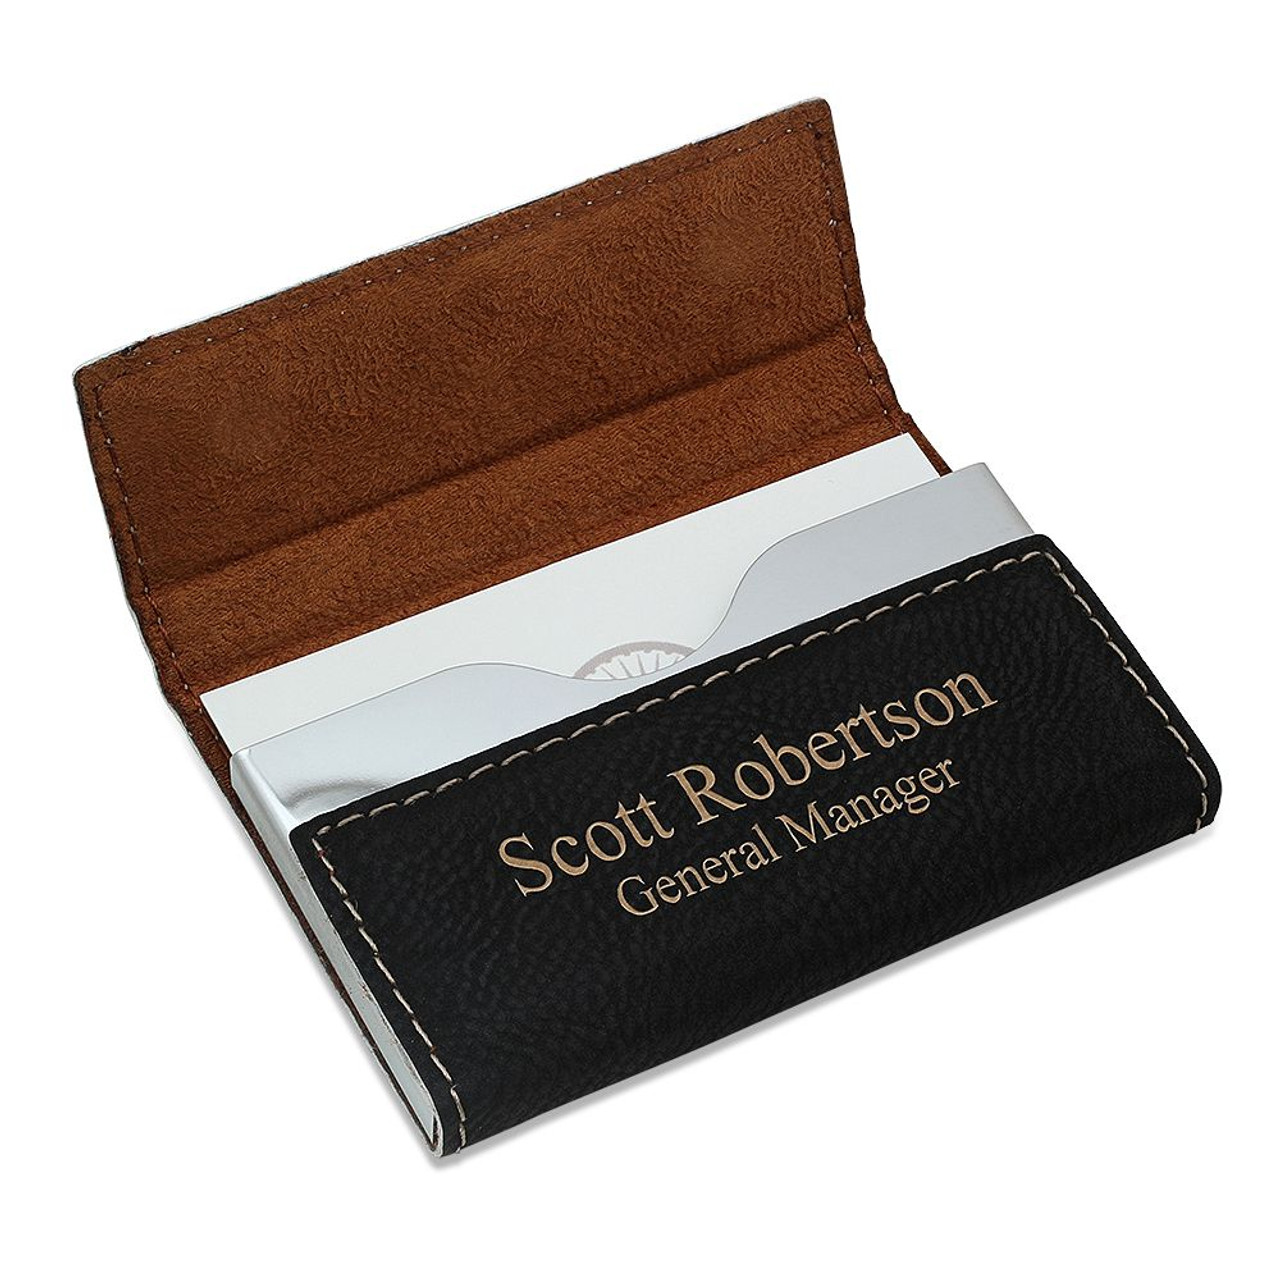 Personalized Business Card Holders For Women